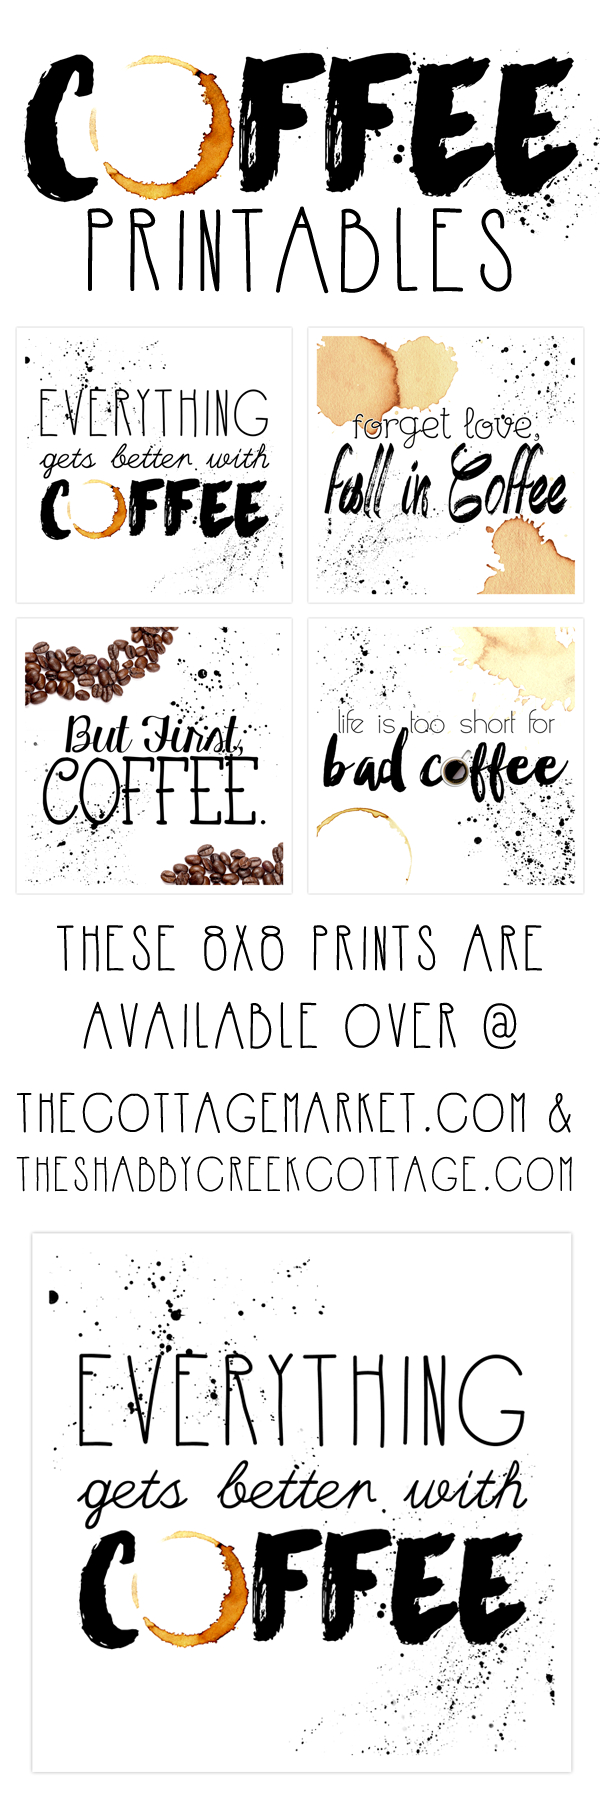 Free Printable Art: The Coffee Collection - The Cottage Market - Free Printable Coffee Bar Signs